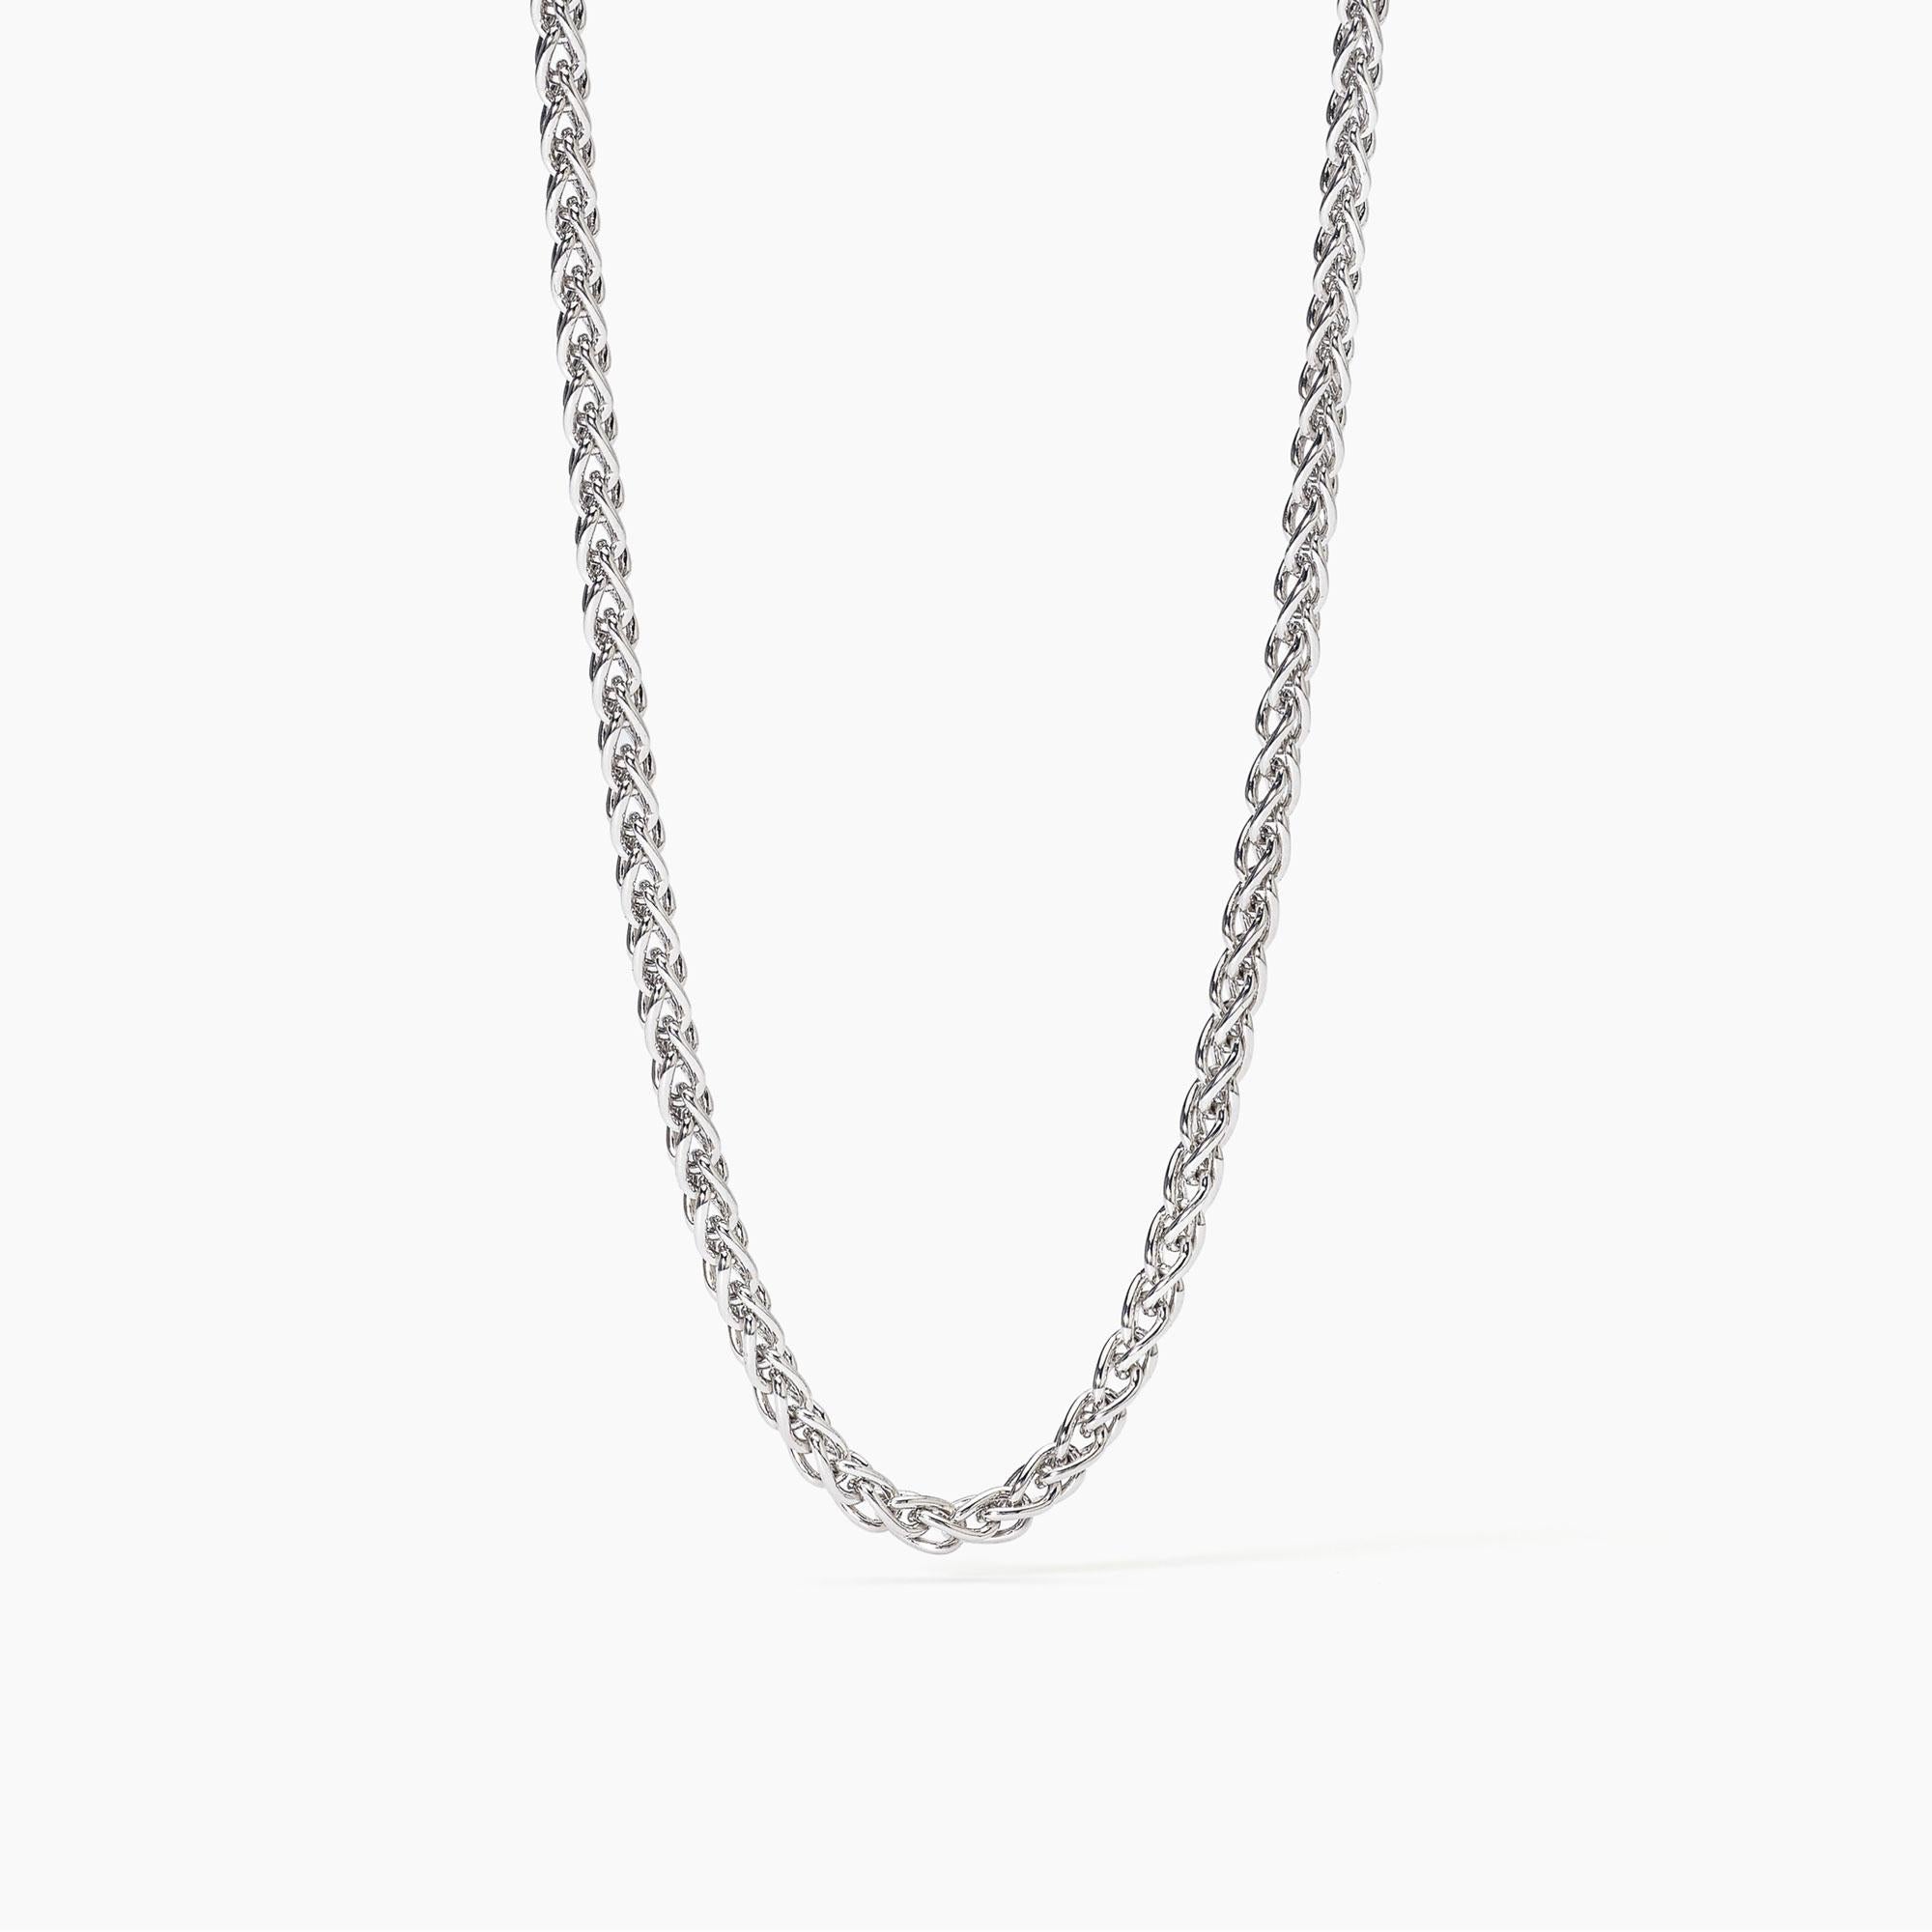 Mabina Man - Silver necklace with spike chain EVERY DAY - 553631